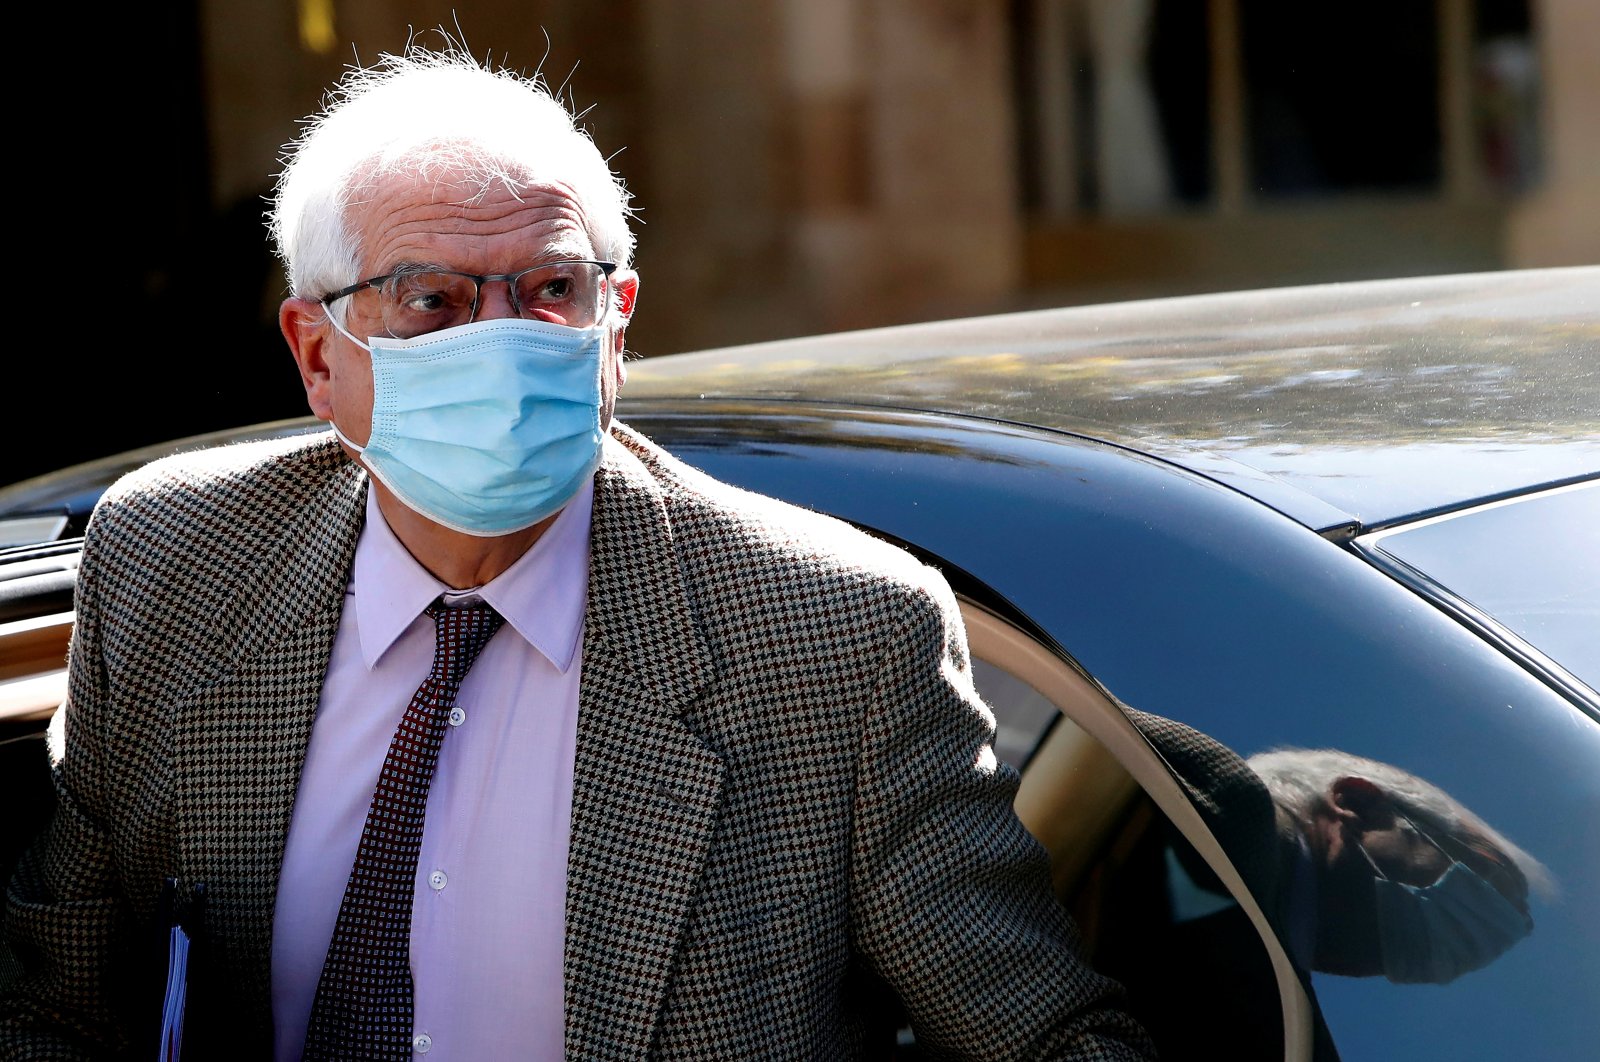 High Representative of the European Union for Foreign Affairs and Security Policy Josep Borrell arrives for a meeting with Greek Cypriot President Nicos Anastasiades at the Presidential Palace in Nicosia, Cyprus, March 5, 2021. (REUTERS)